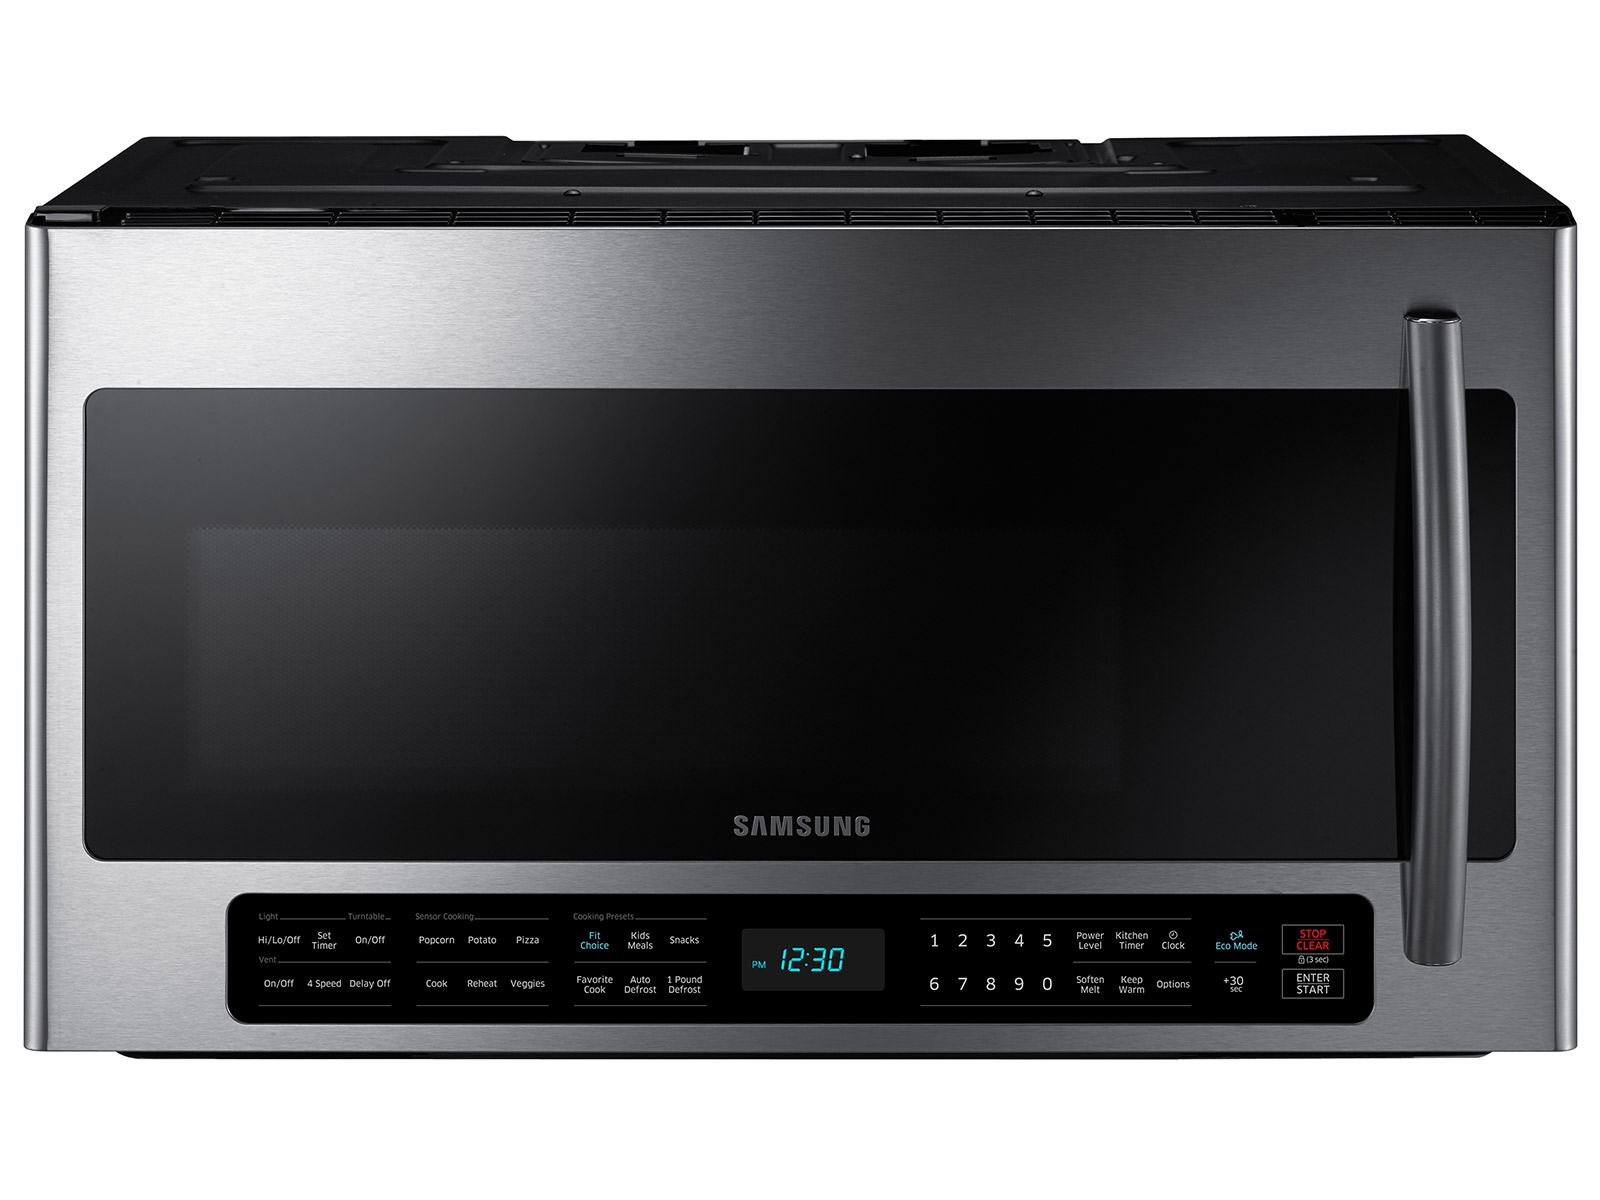 https://image-us.samsung.com/SamsungUS/home/home-appliances/microwaves/over-the-range/pdp/me20h705mss-aa/01_ME20H705MSS_001_Front_Silver.jpg?$product-details-jpg$